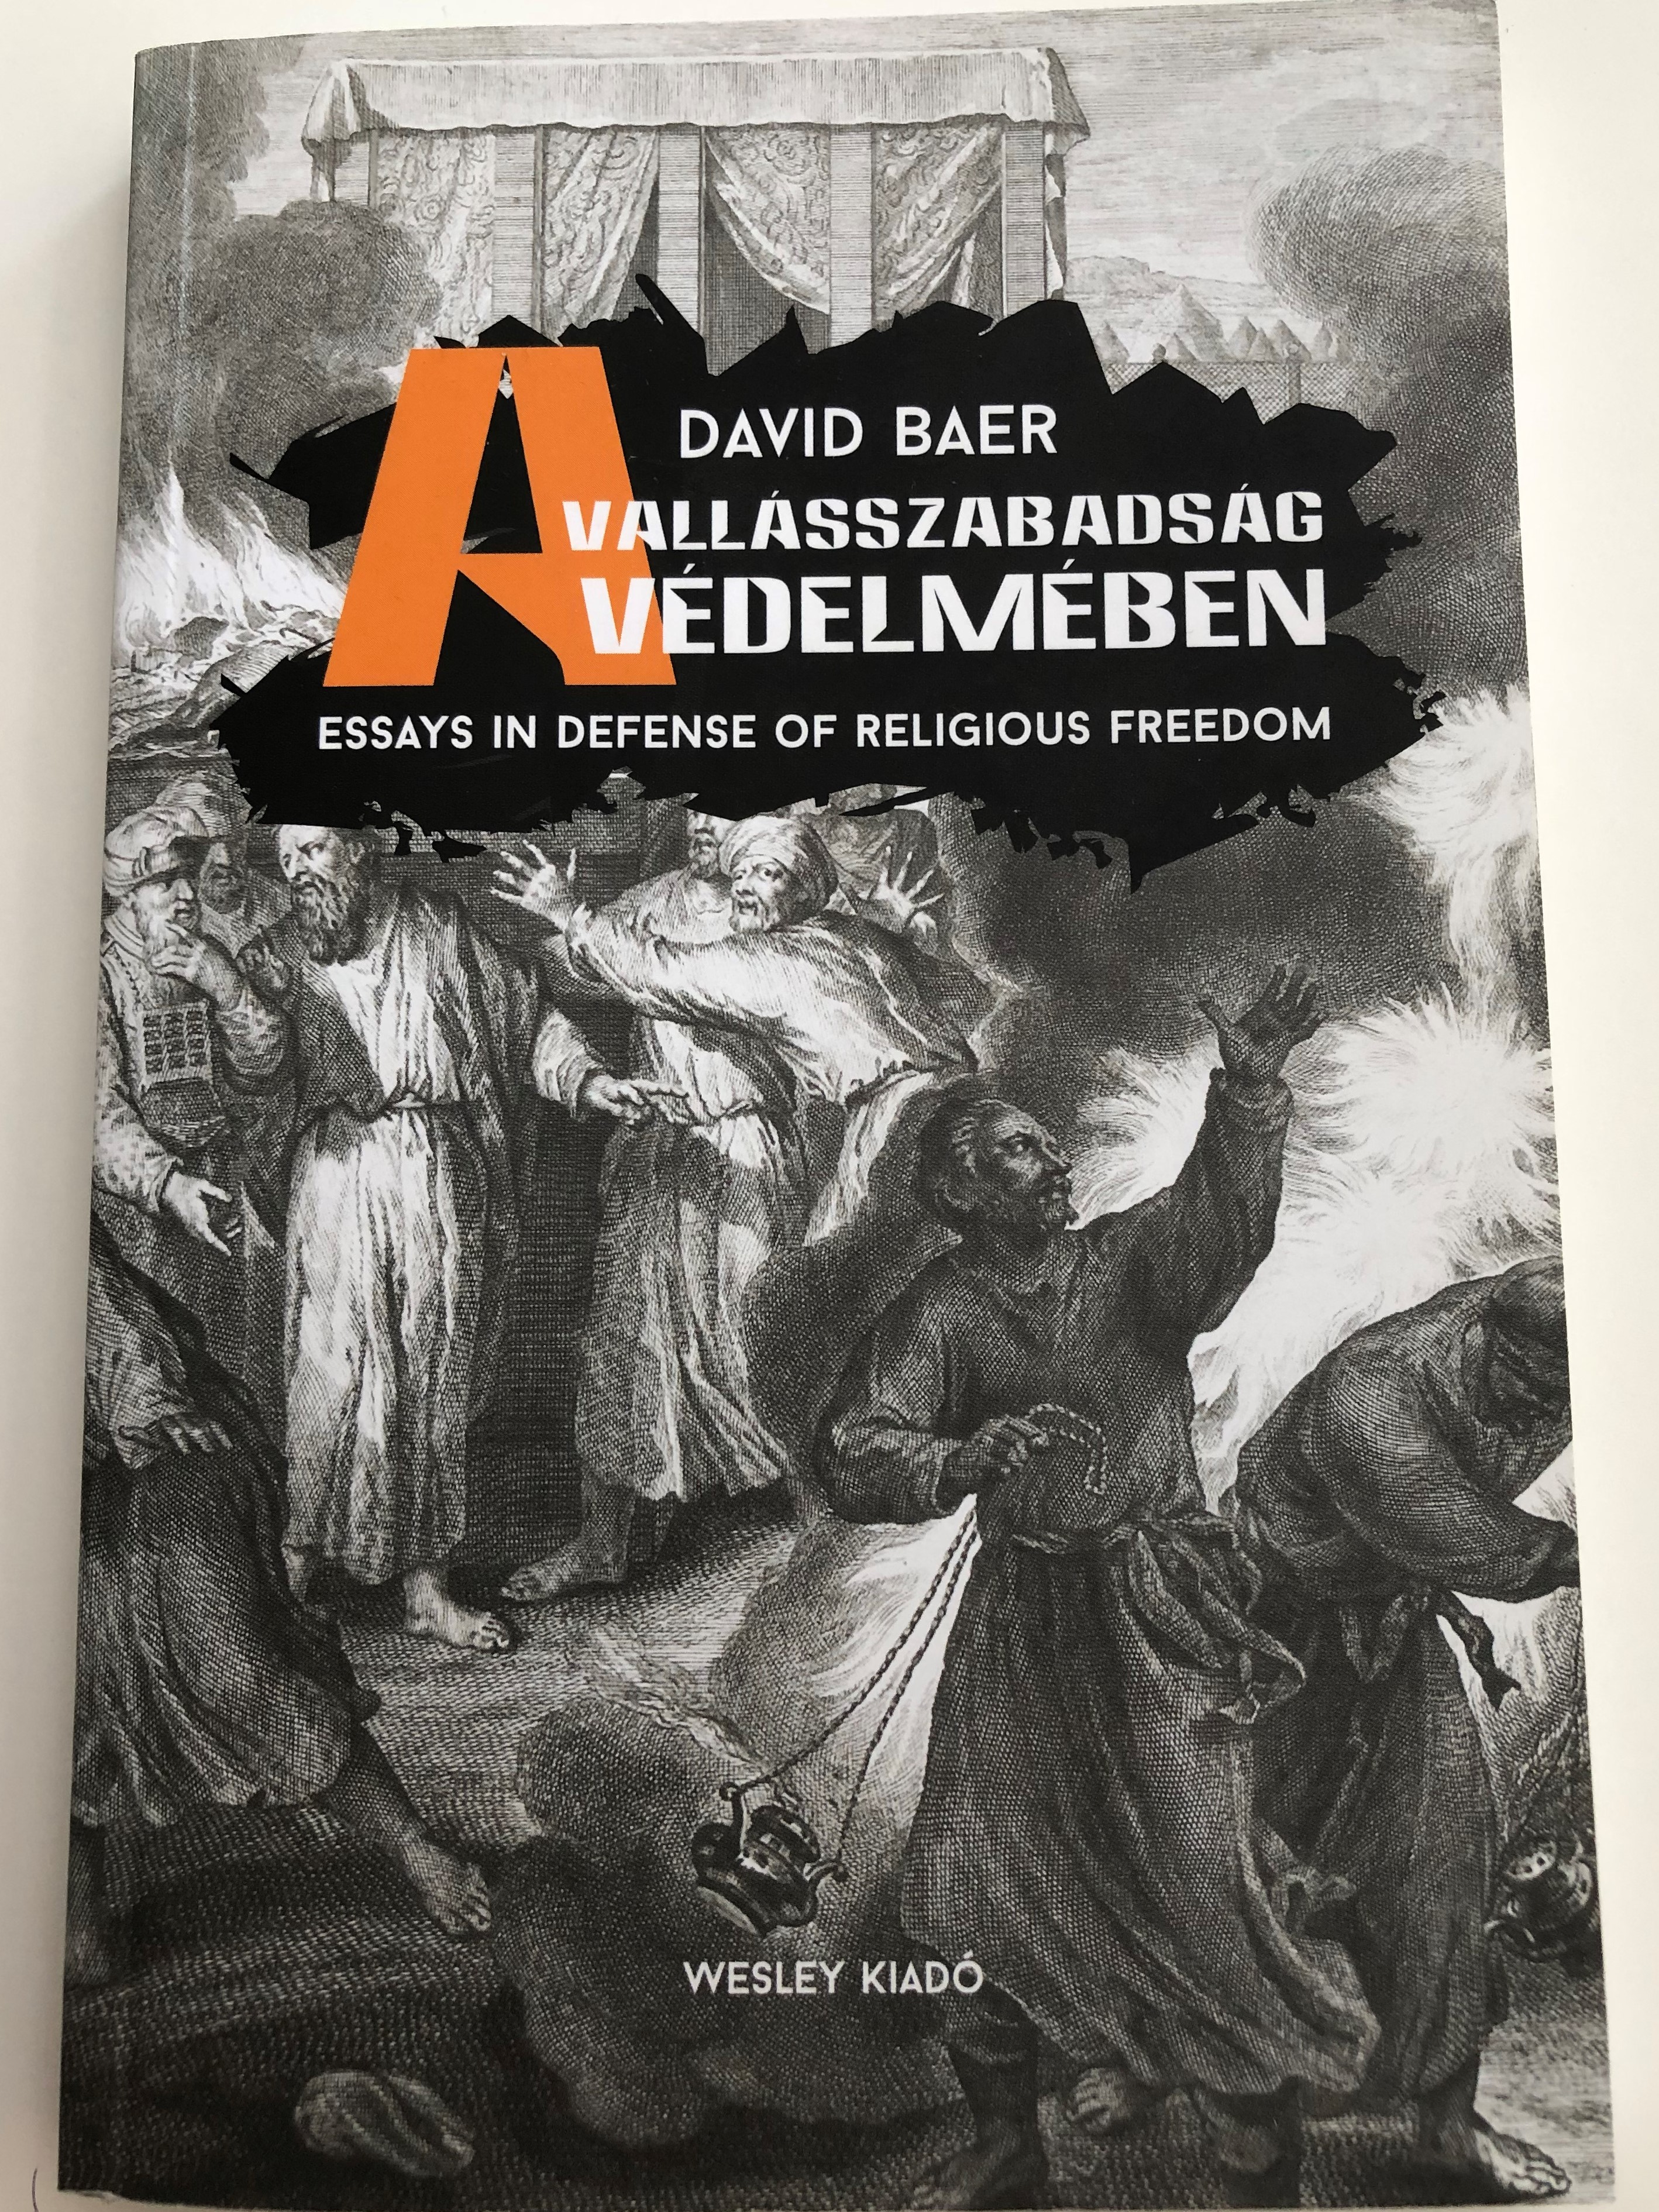 a-vall-sszabads-g-v-delm-ben-by-david-baer-essays-in-defense-of-religious-freedom-hungarian-english-bilingual-edition-wesley-kiad-1-.jpg